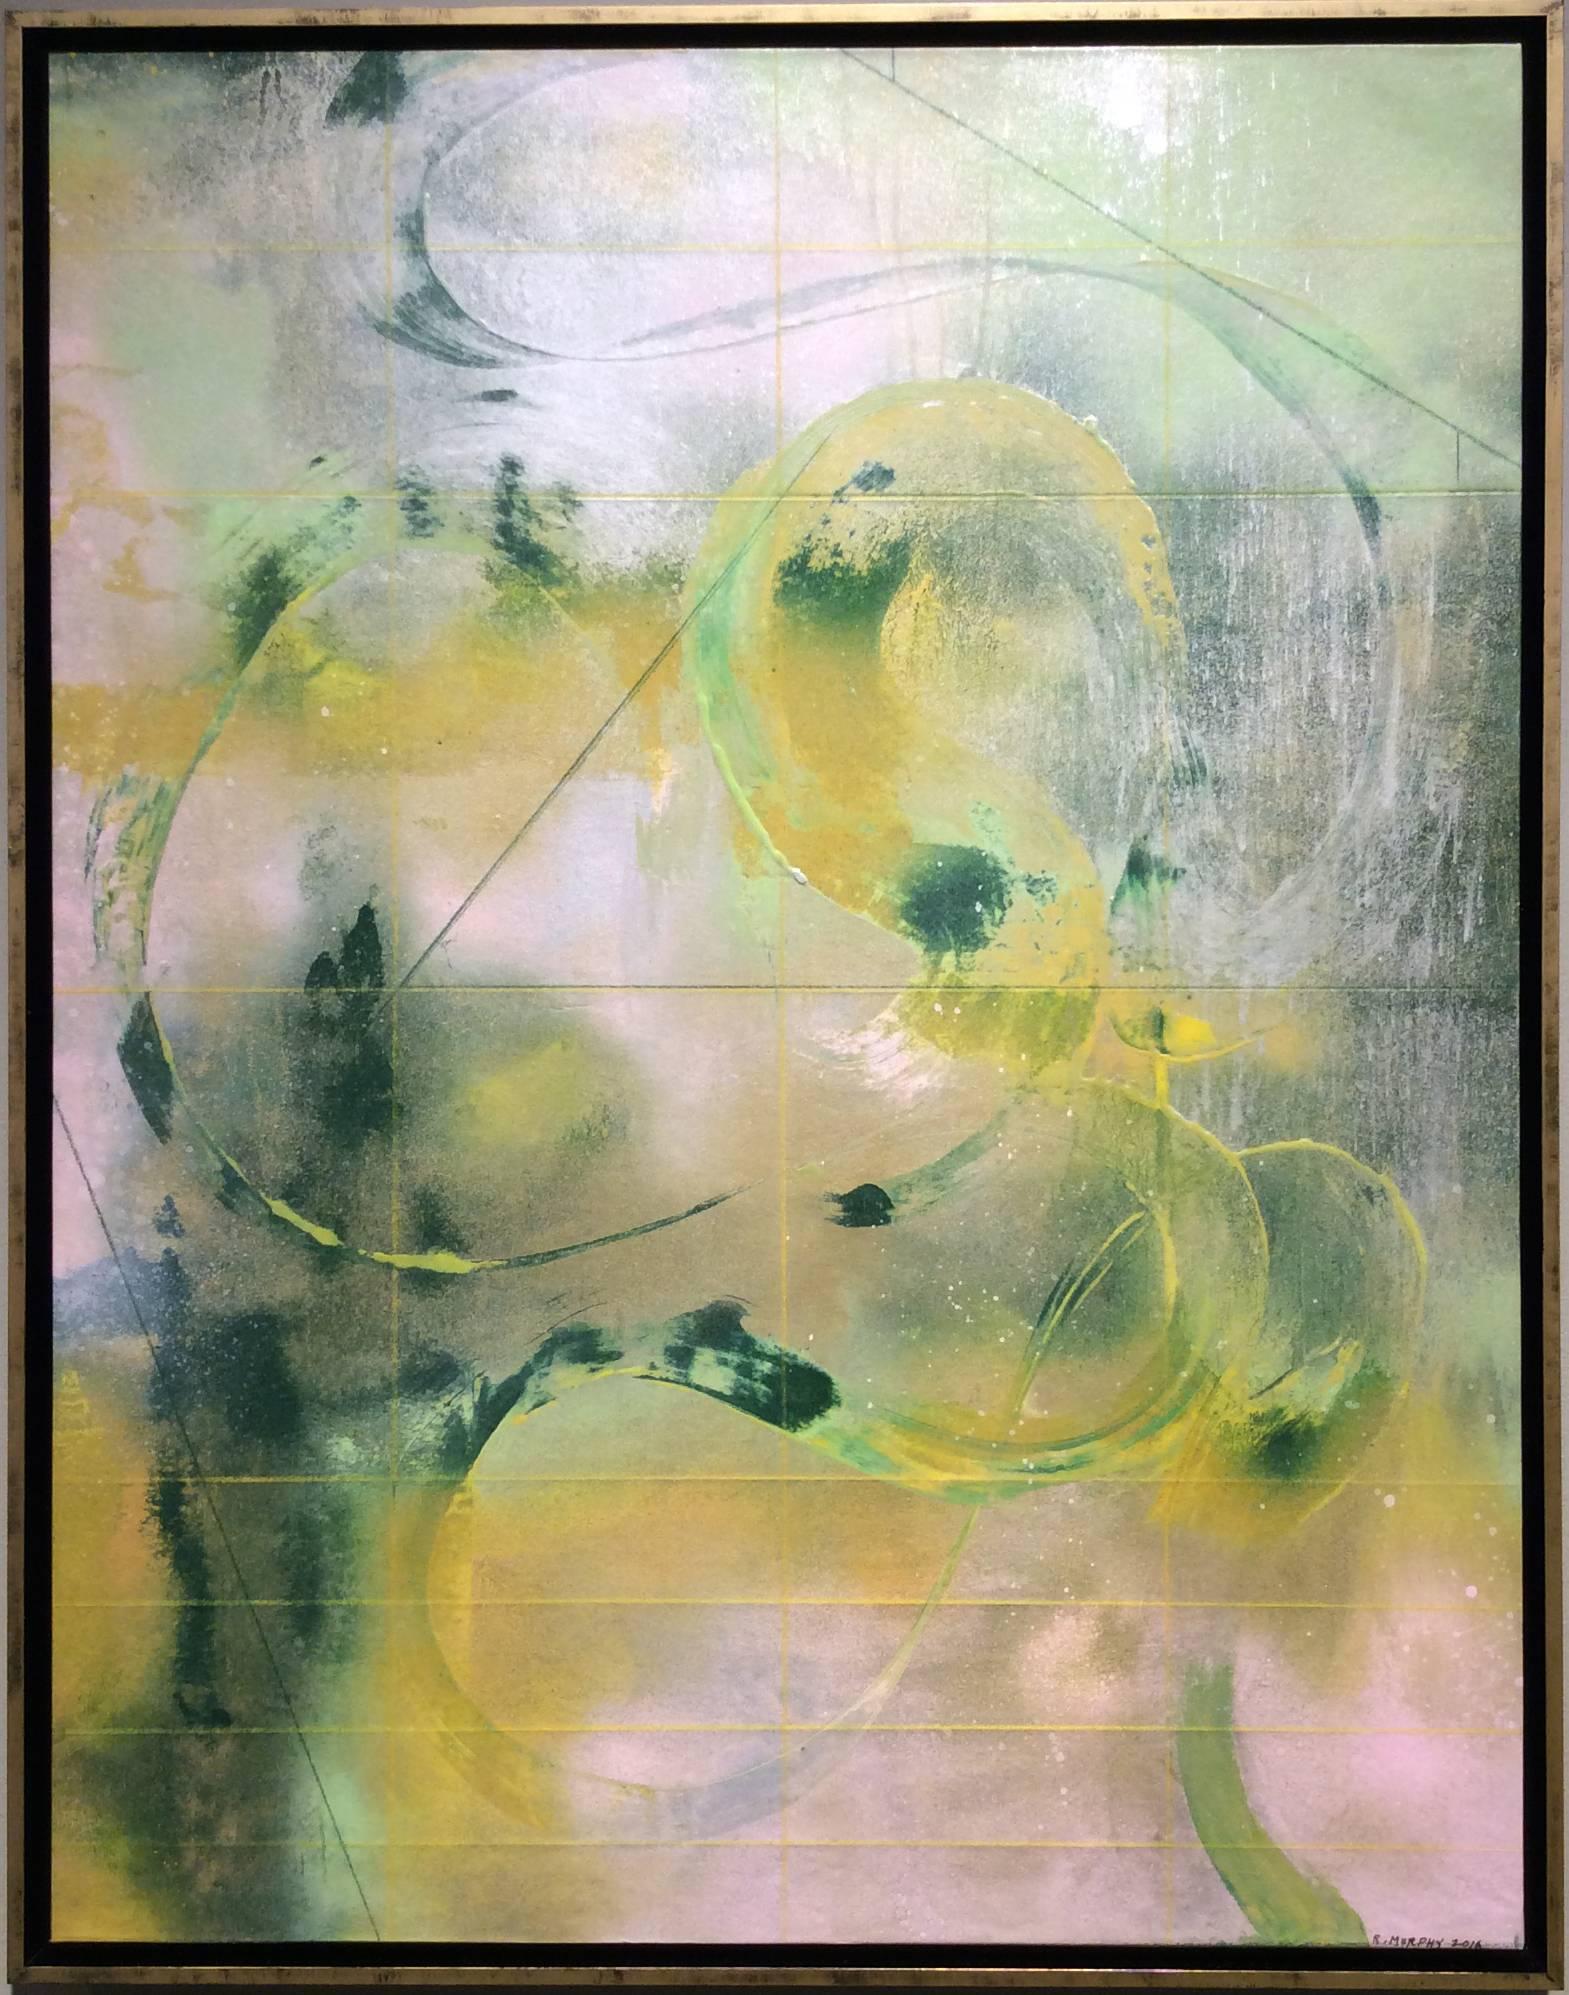 Looking for Truth (Gestural Abstract Painting in Green and Light Pink)